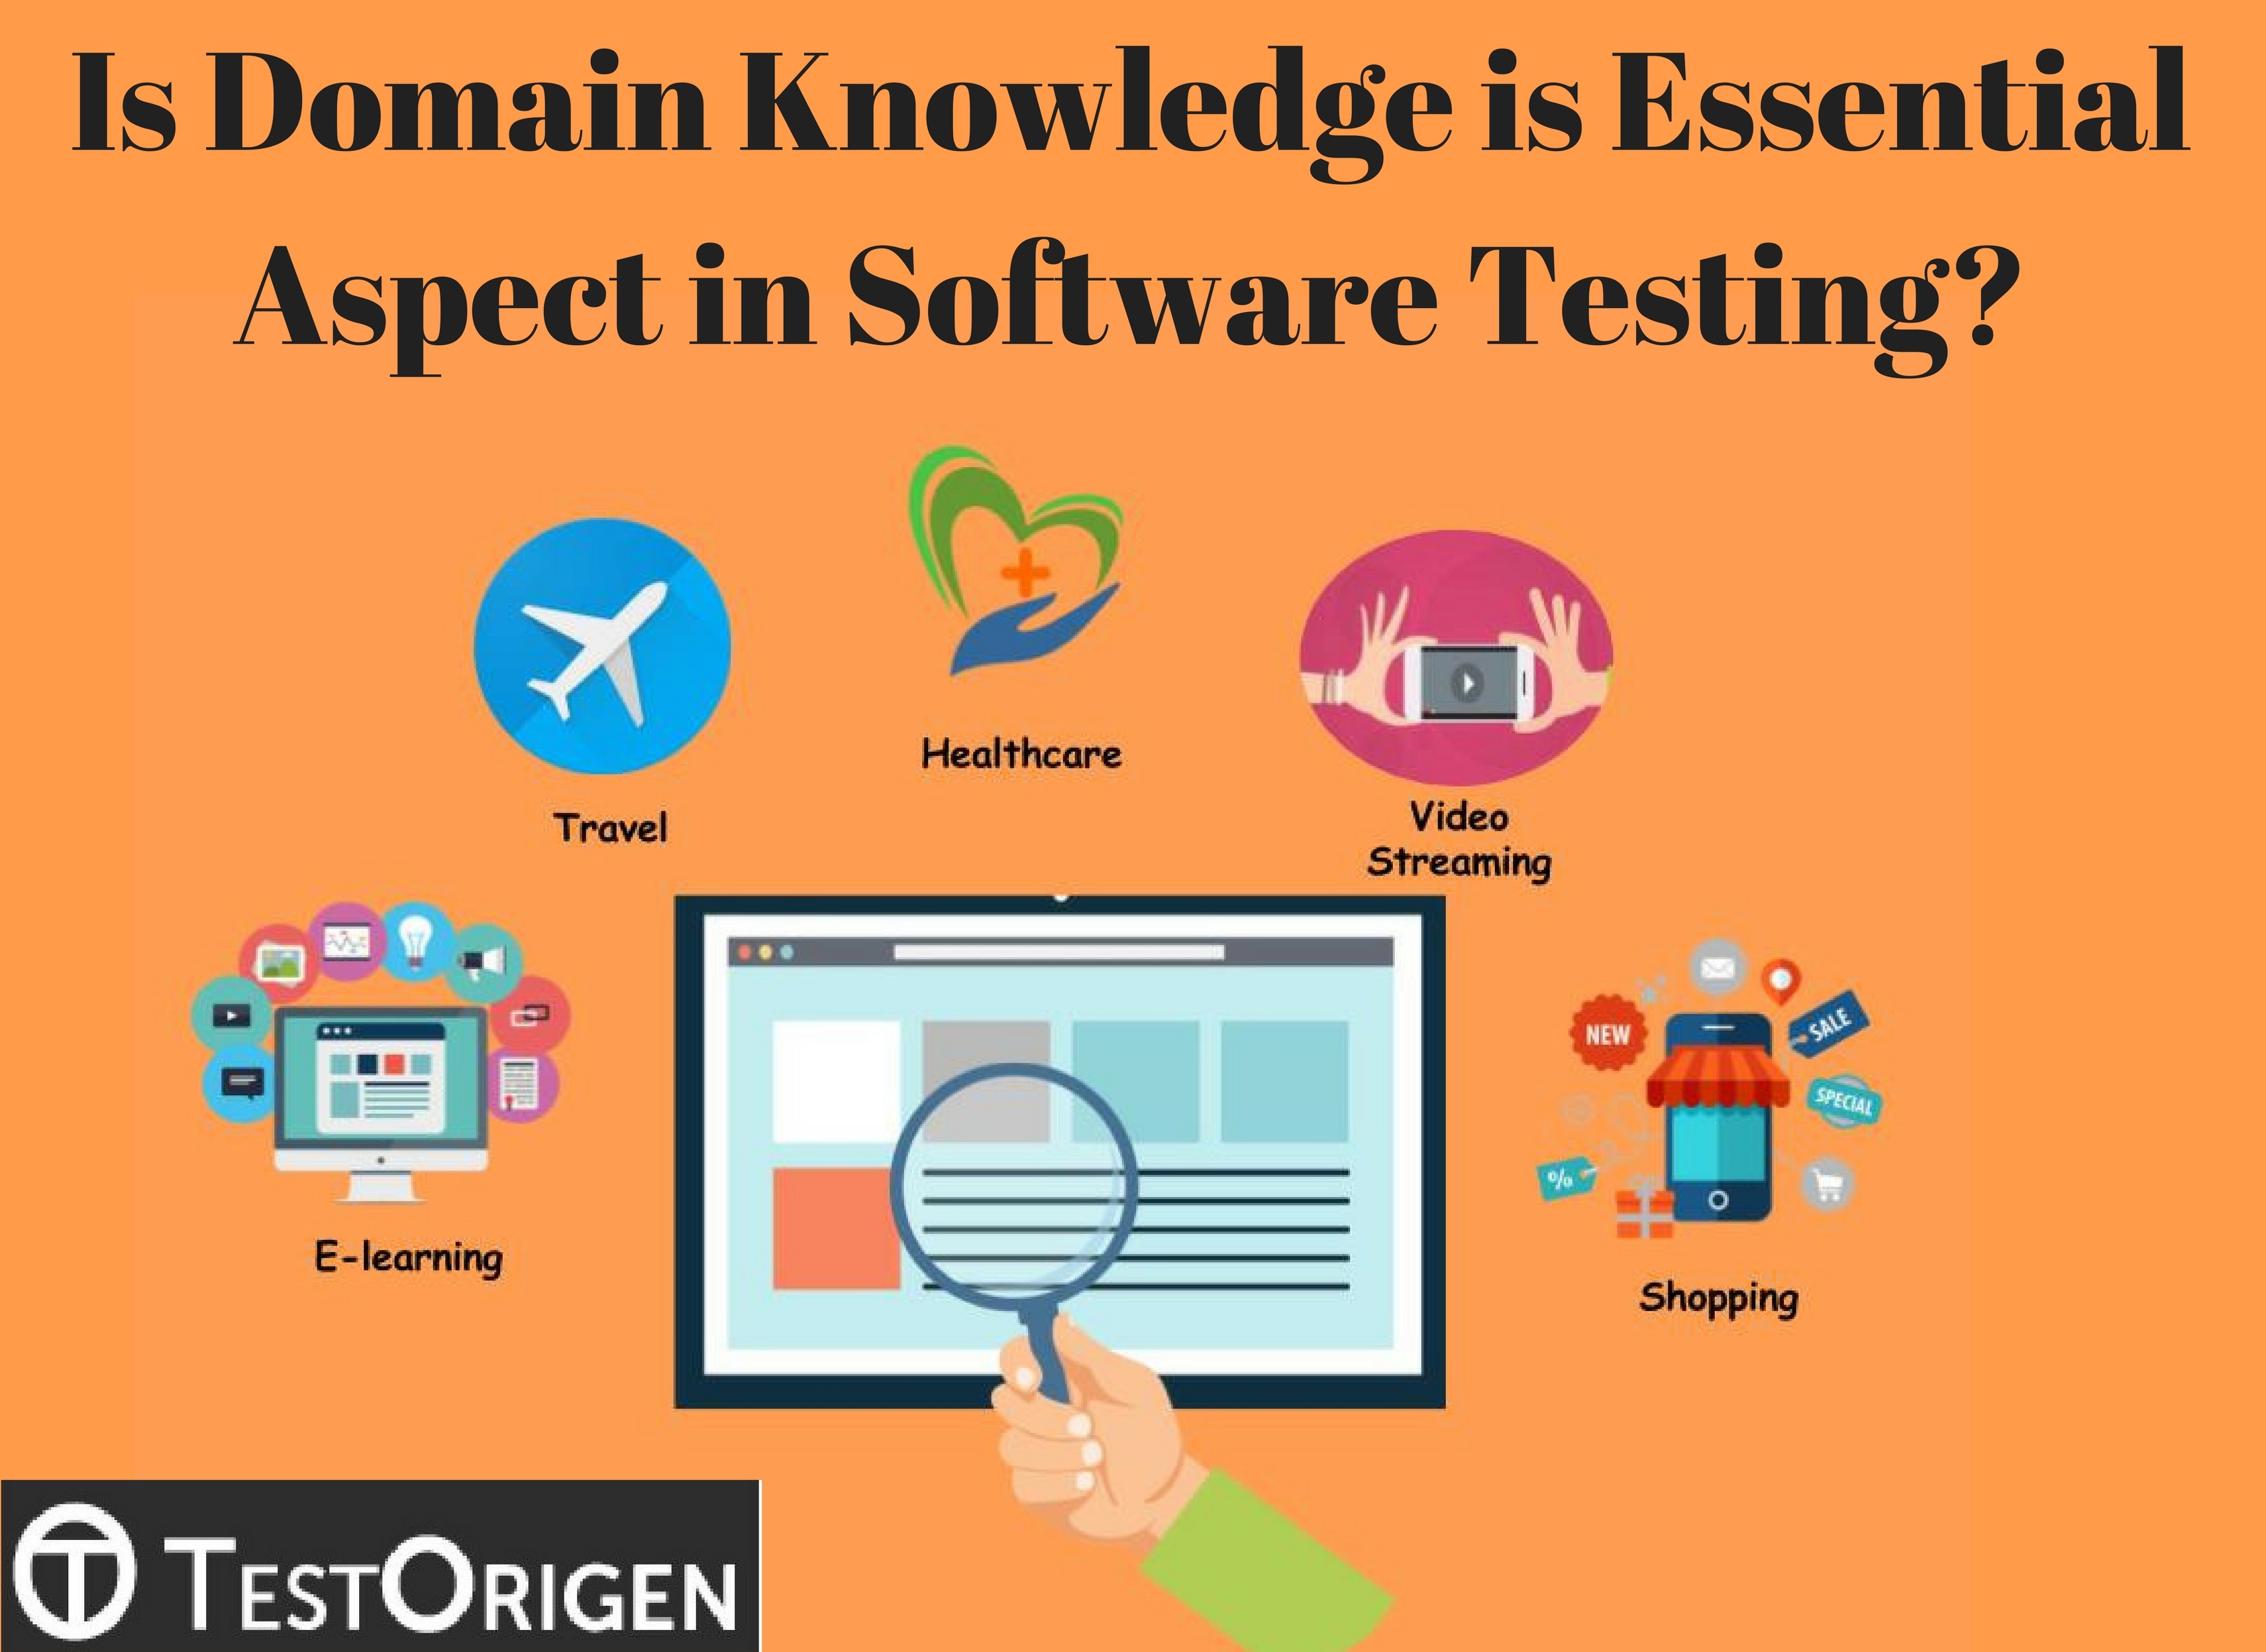 Is Domain Knowledge is Essential Aspect in Software Testing?